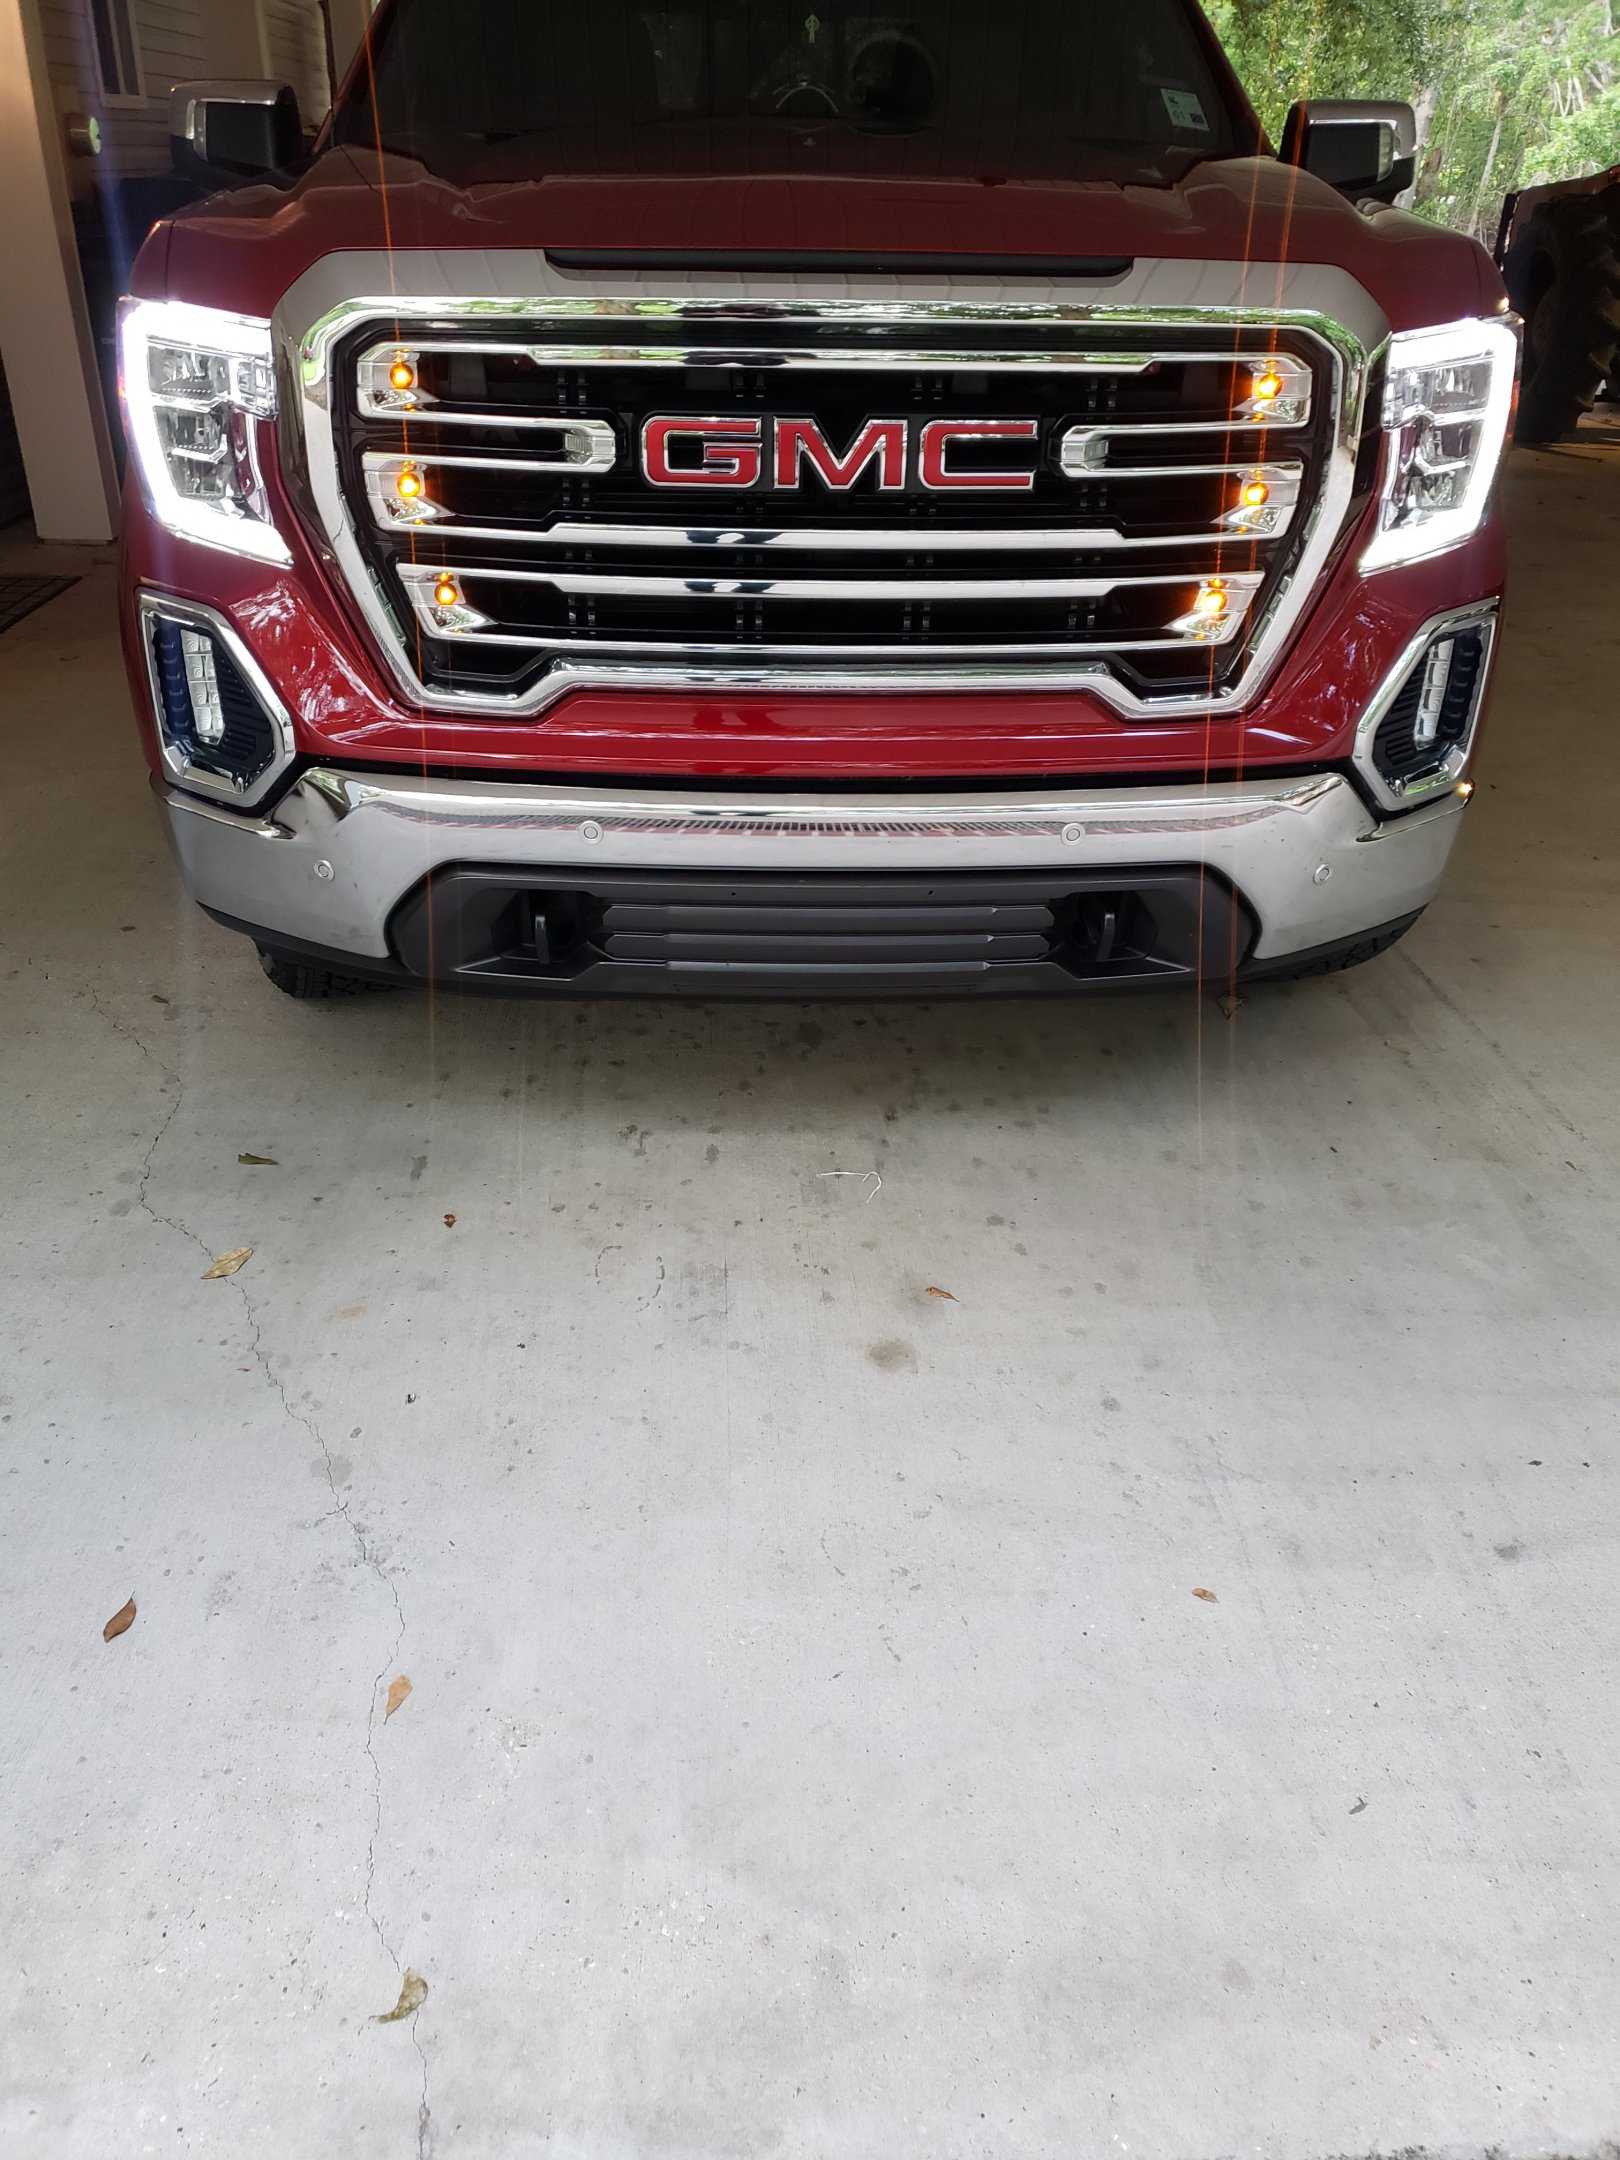 2021 GMC grill accents